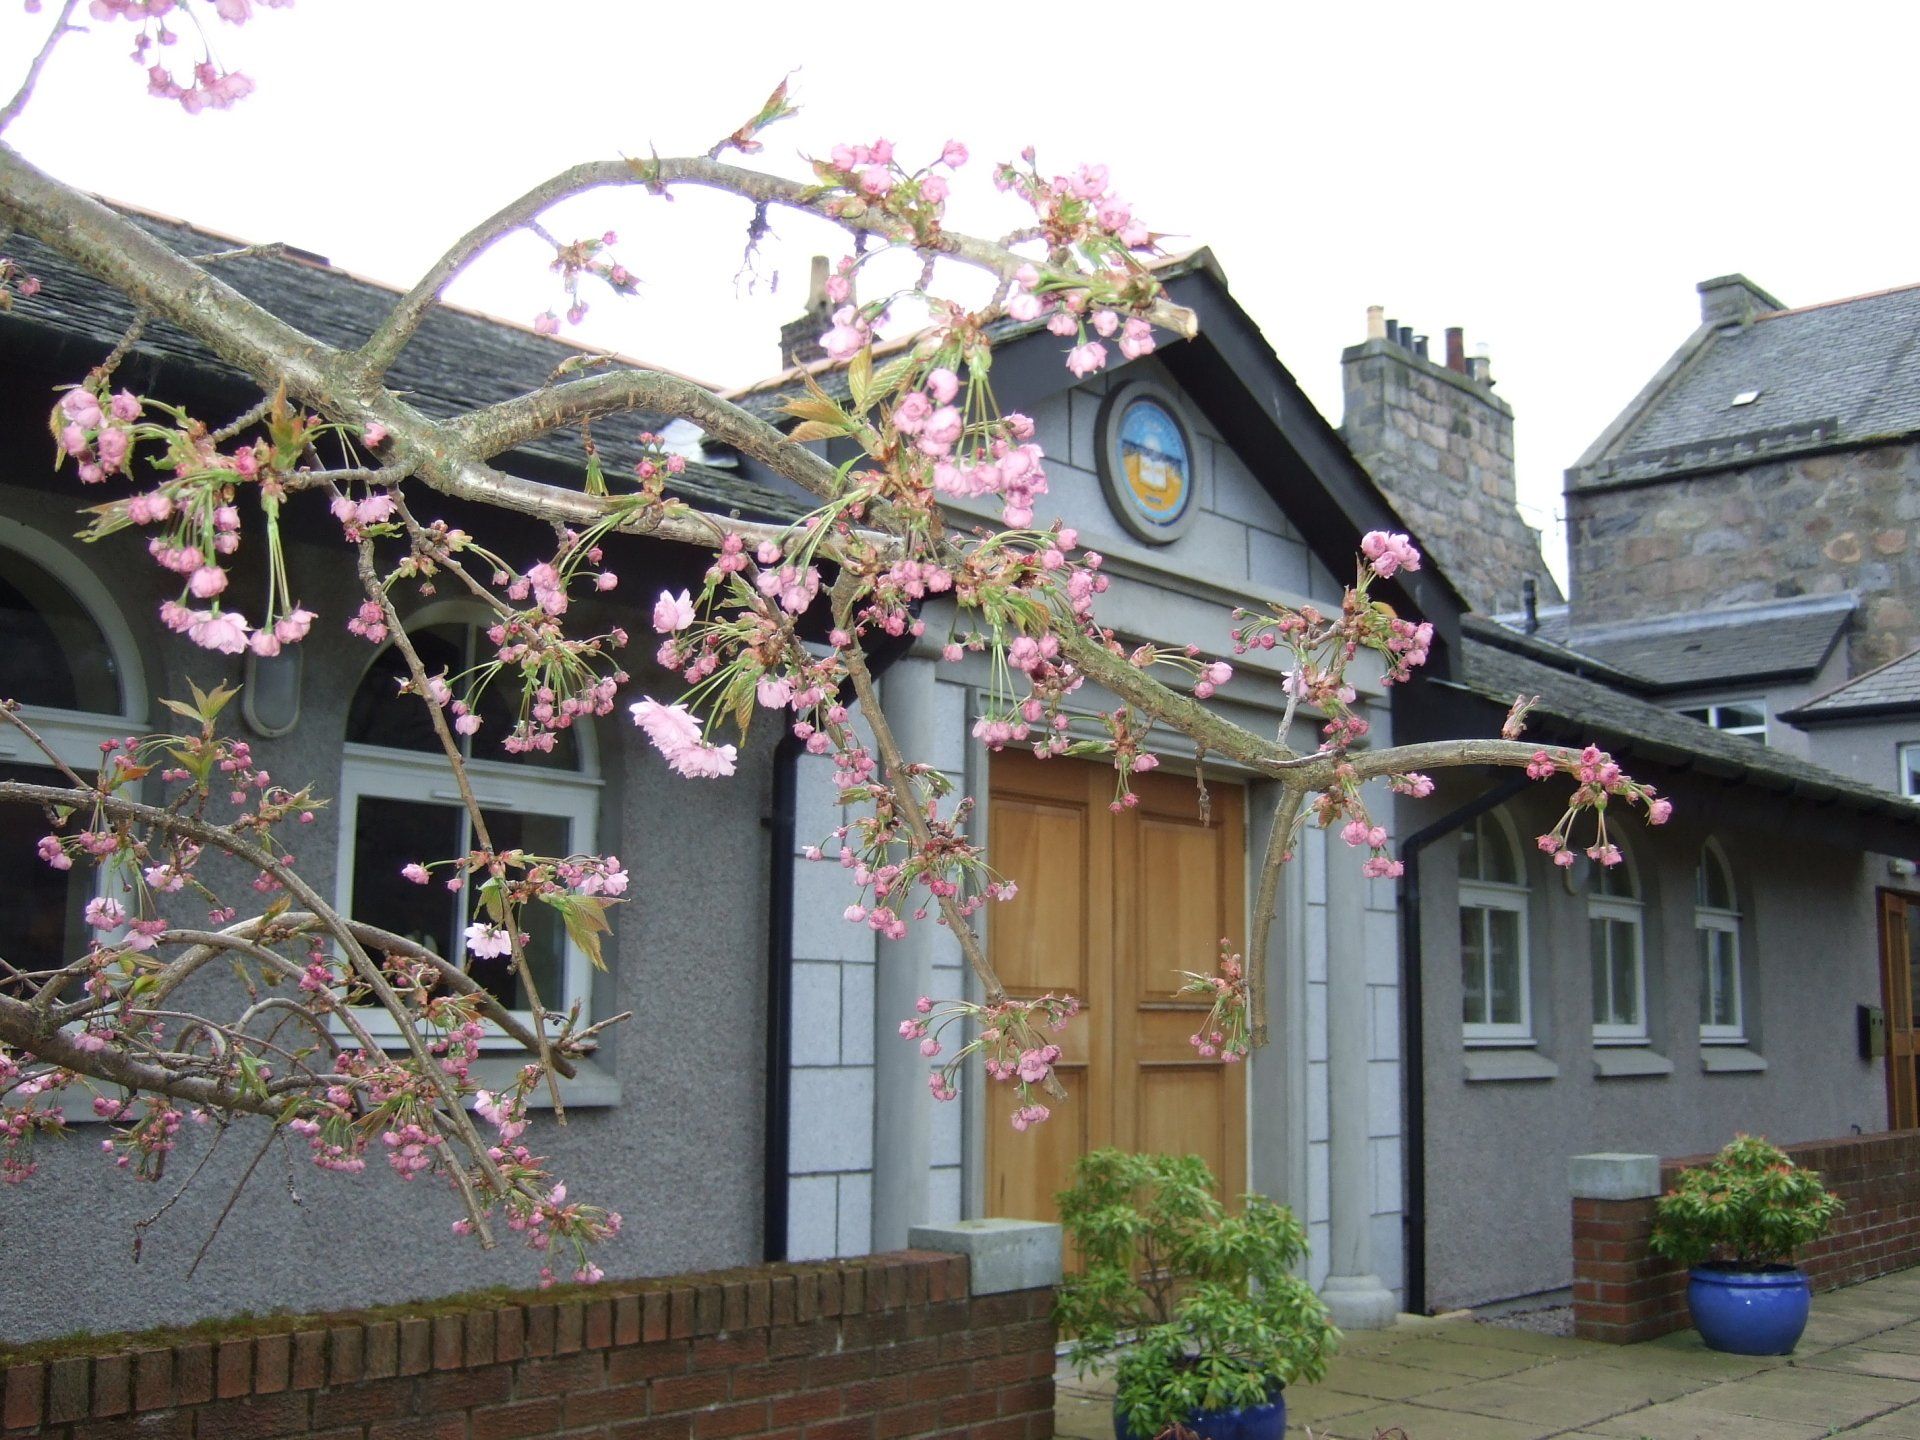 Aberdeen Spiritualist Centre, The Sanctuary with blossoming tree in foreground